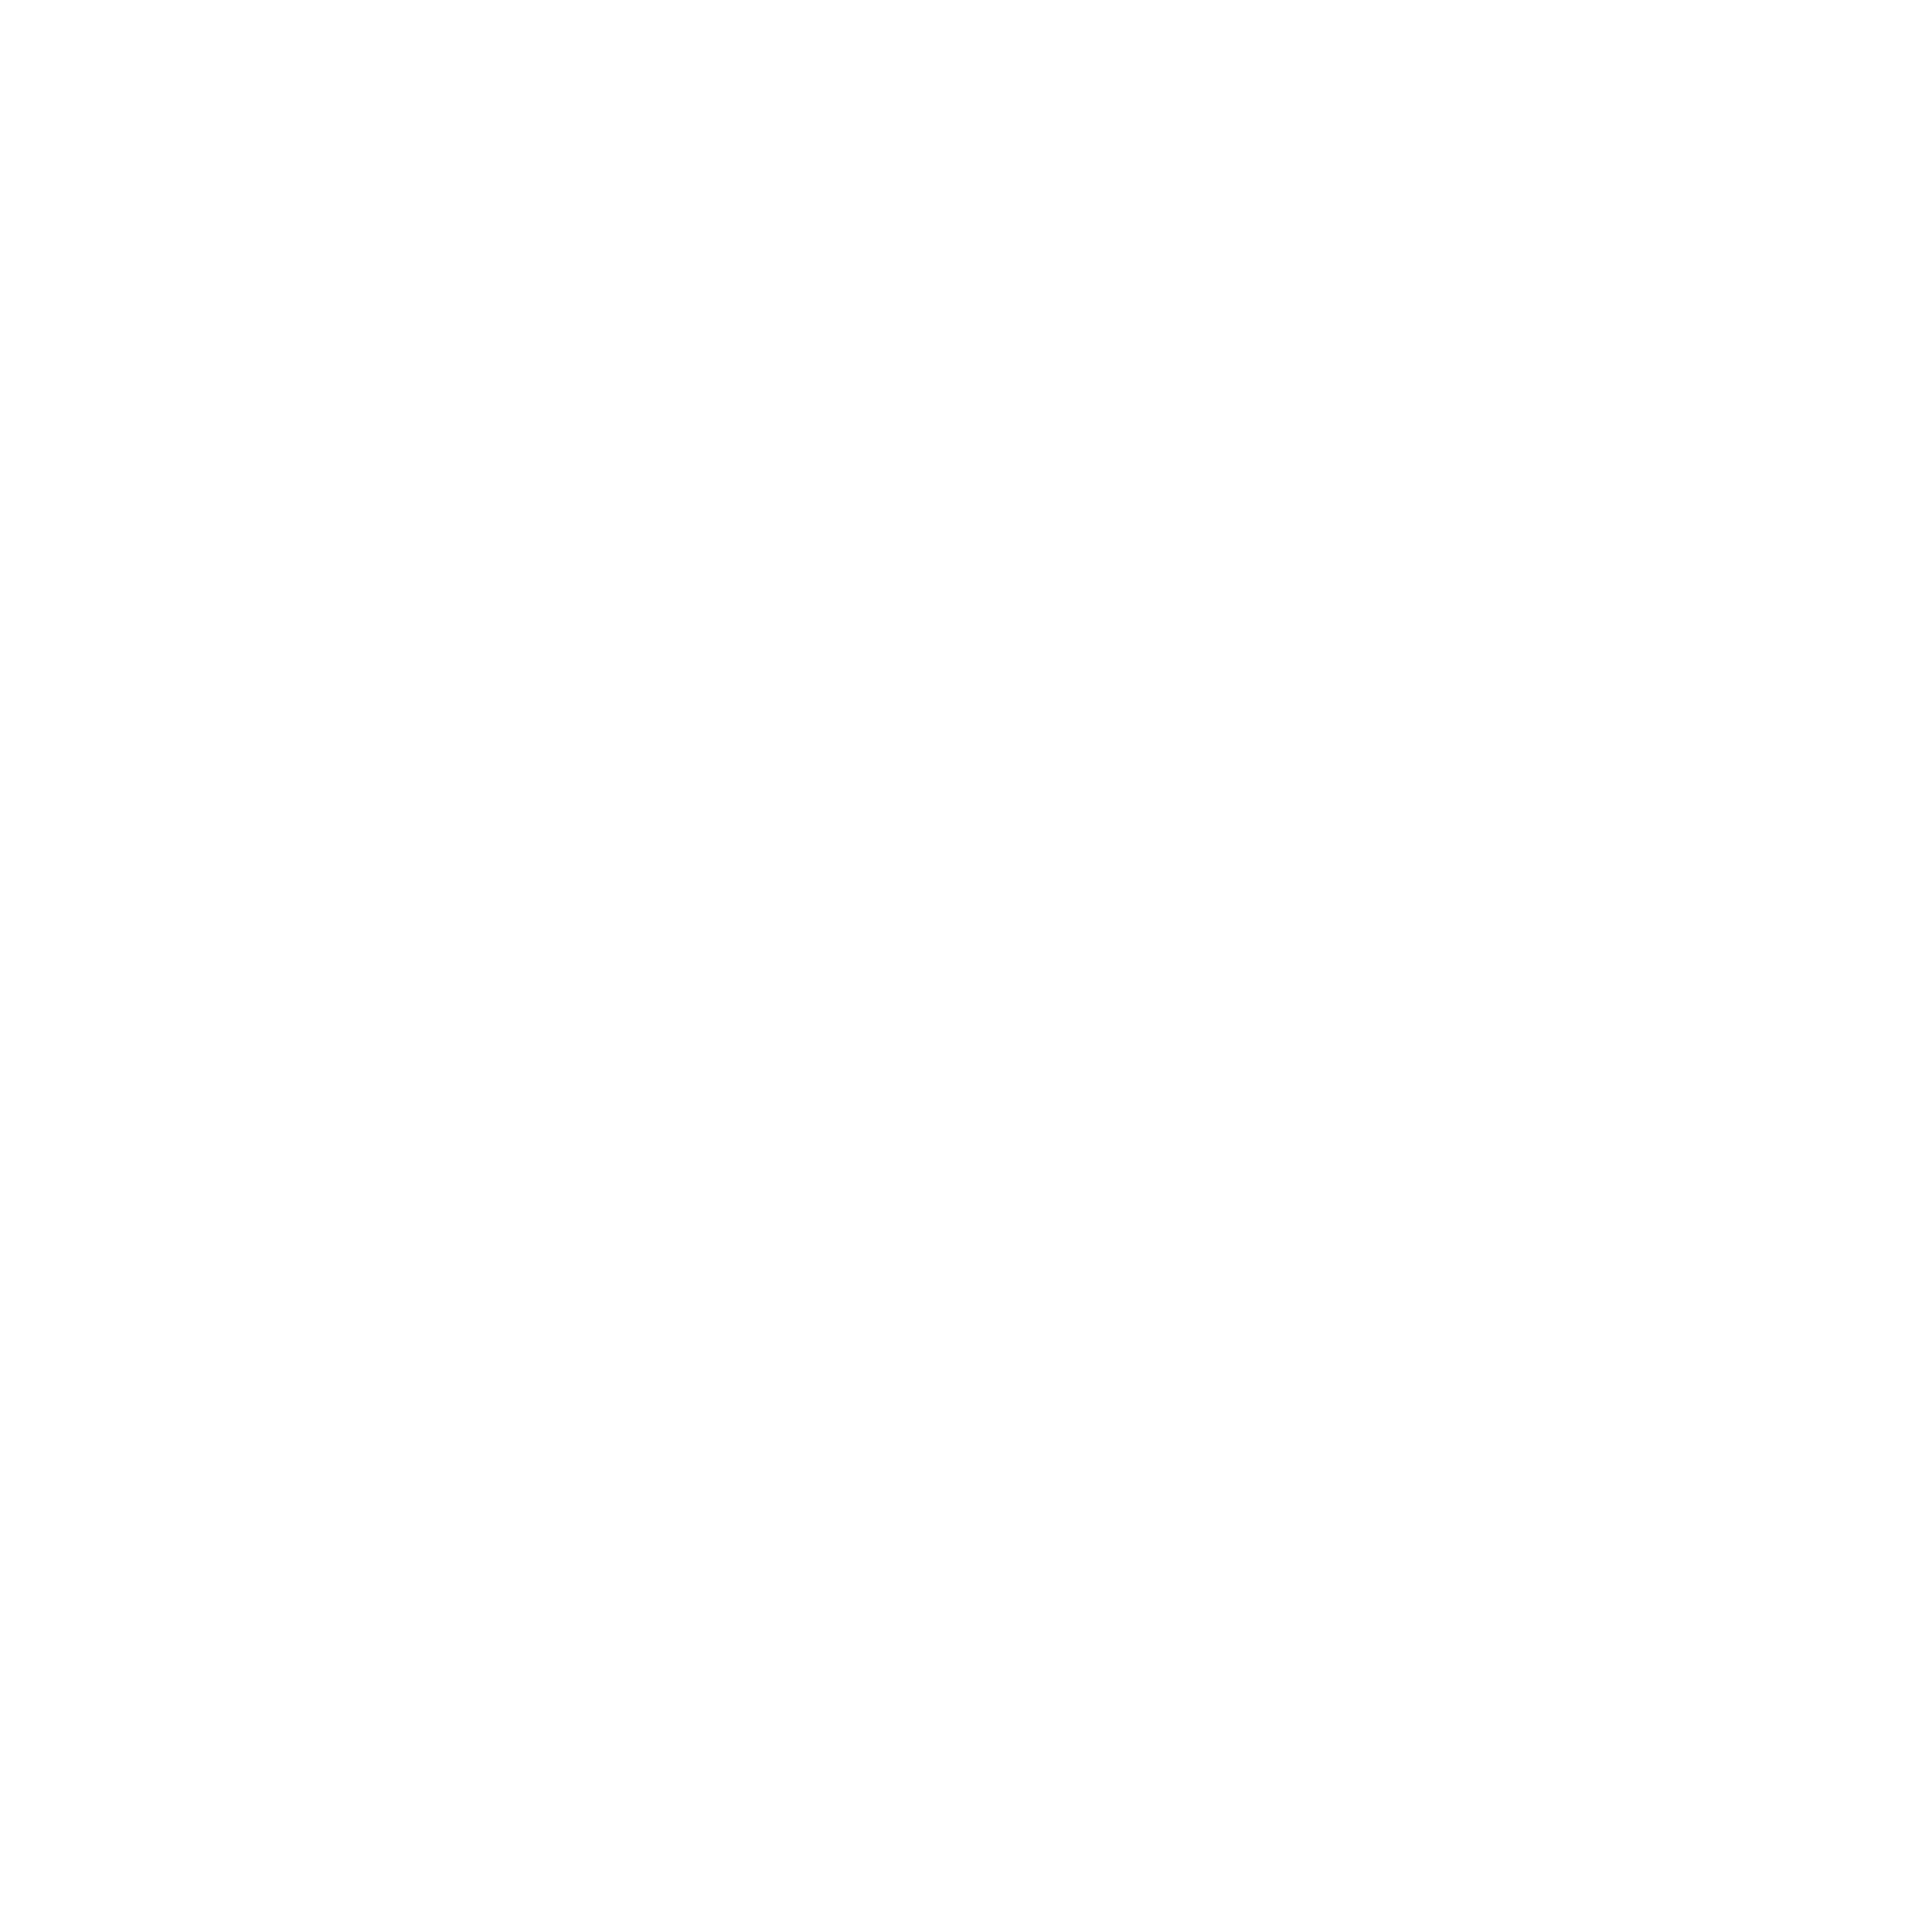 Luxechic Couture Boutique - 🛍️Luxechic Couture Boutique 🛍️ Retail  Boutique with the Hottest fashions‼️ 2-5 day fast shipping 🌏 tag  #luxechiccouture Store hours: Tue-Thur 11-7 Fri-Sat 12-10 Open Late🗣 Shop  Online www.luxechiccouture.com